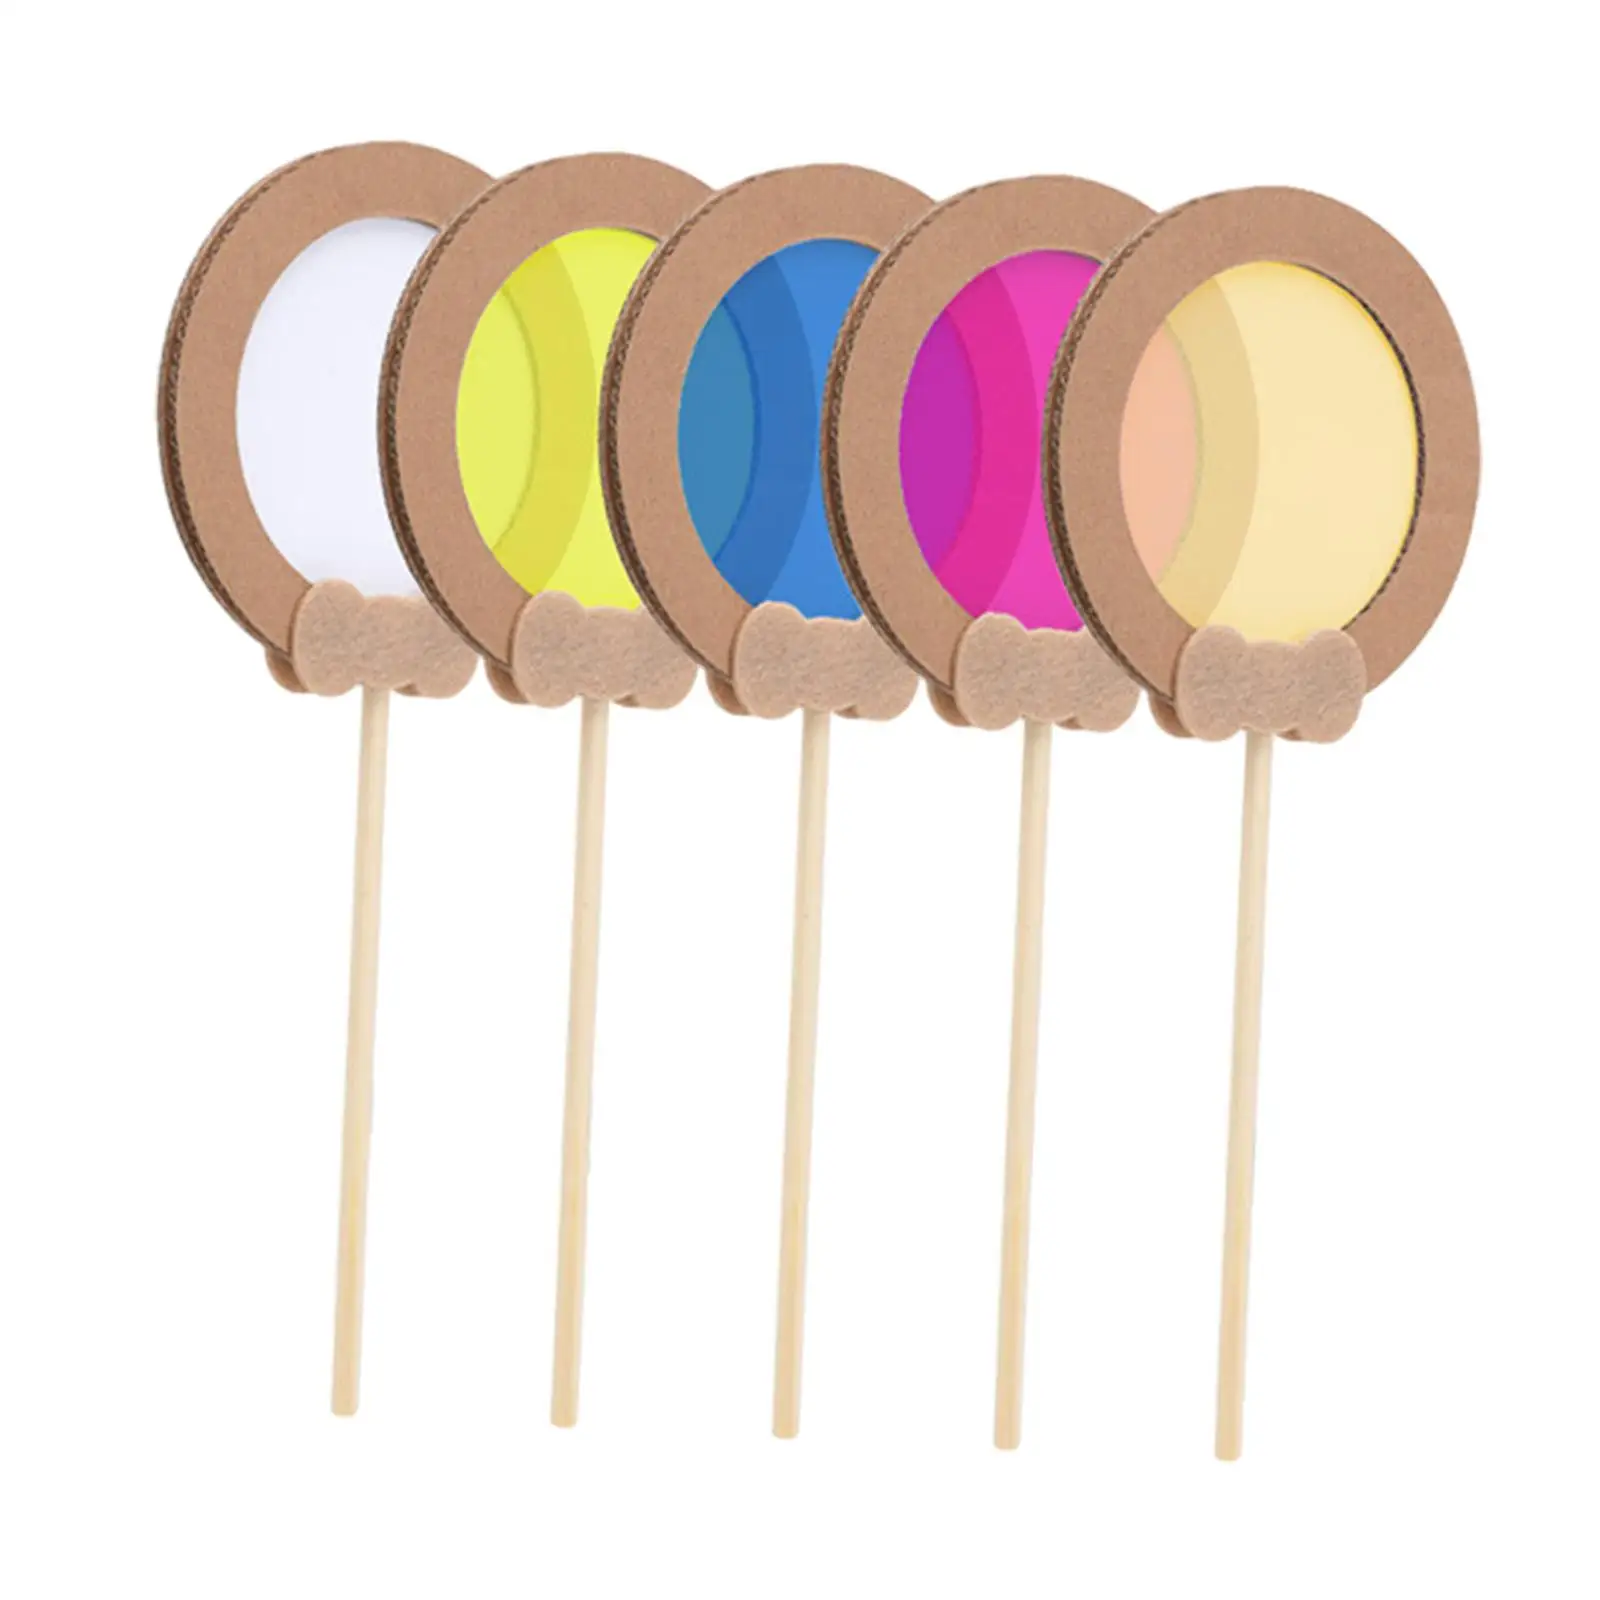 5 Pieces Color Paddles Teaching Tools for Birthday Gift Boys Girls Children